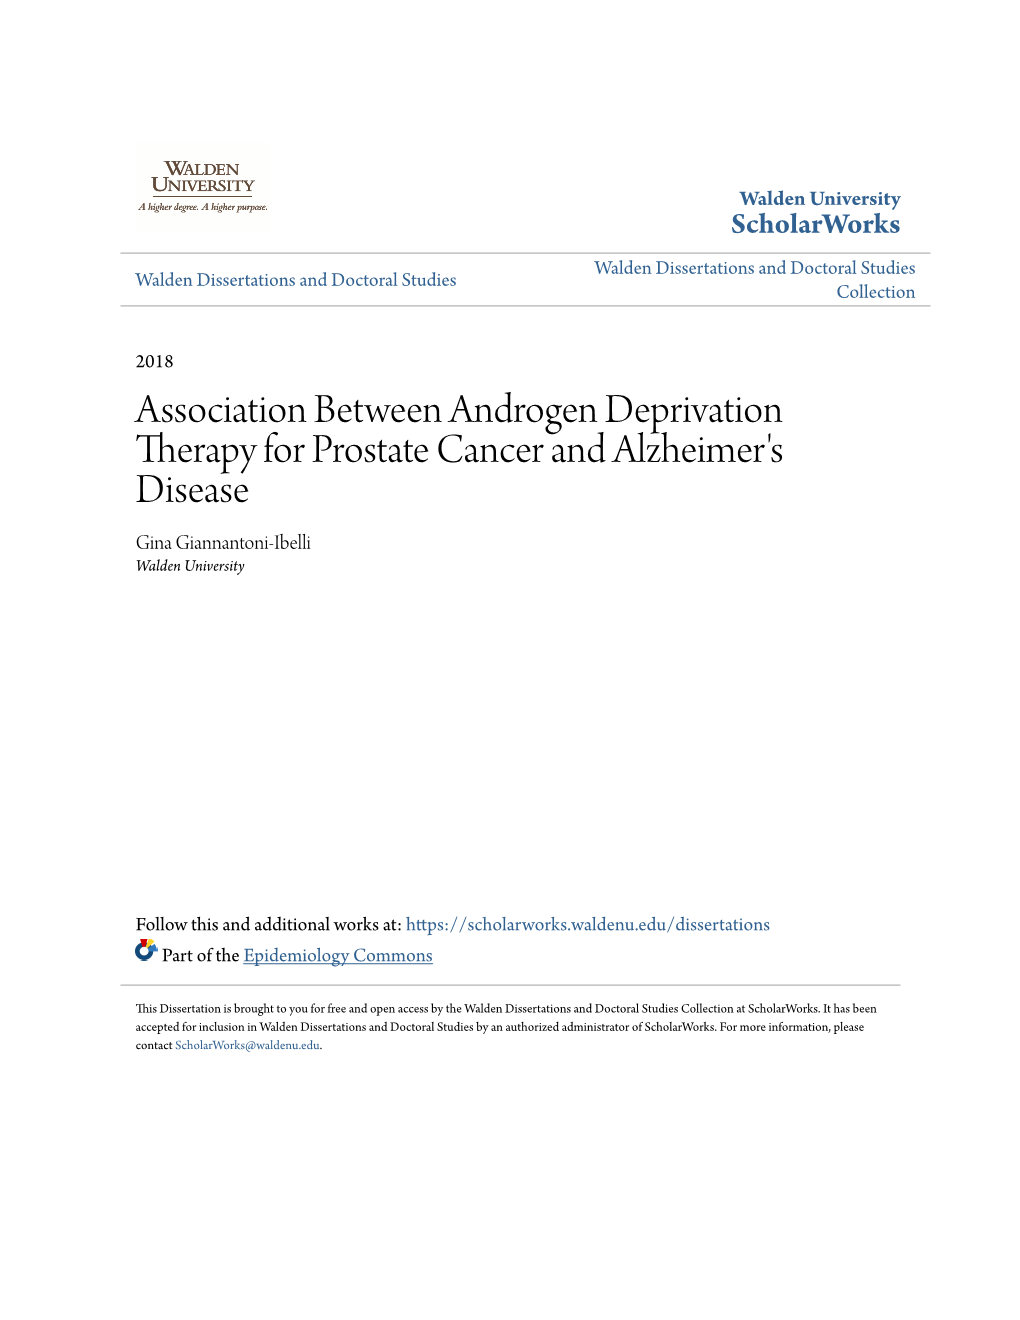 Association Between Androgen Deprivation Therapy for Prostate Cancer and Alzheimer's Disease Gina Giannantoni-Ibelli Walden University